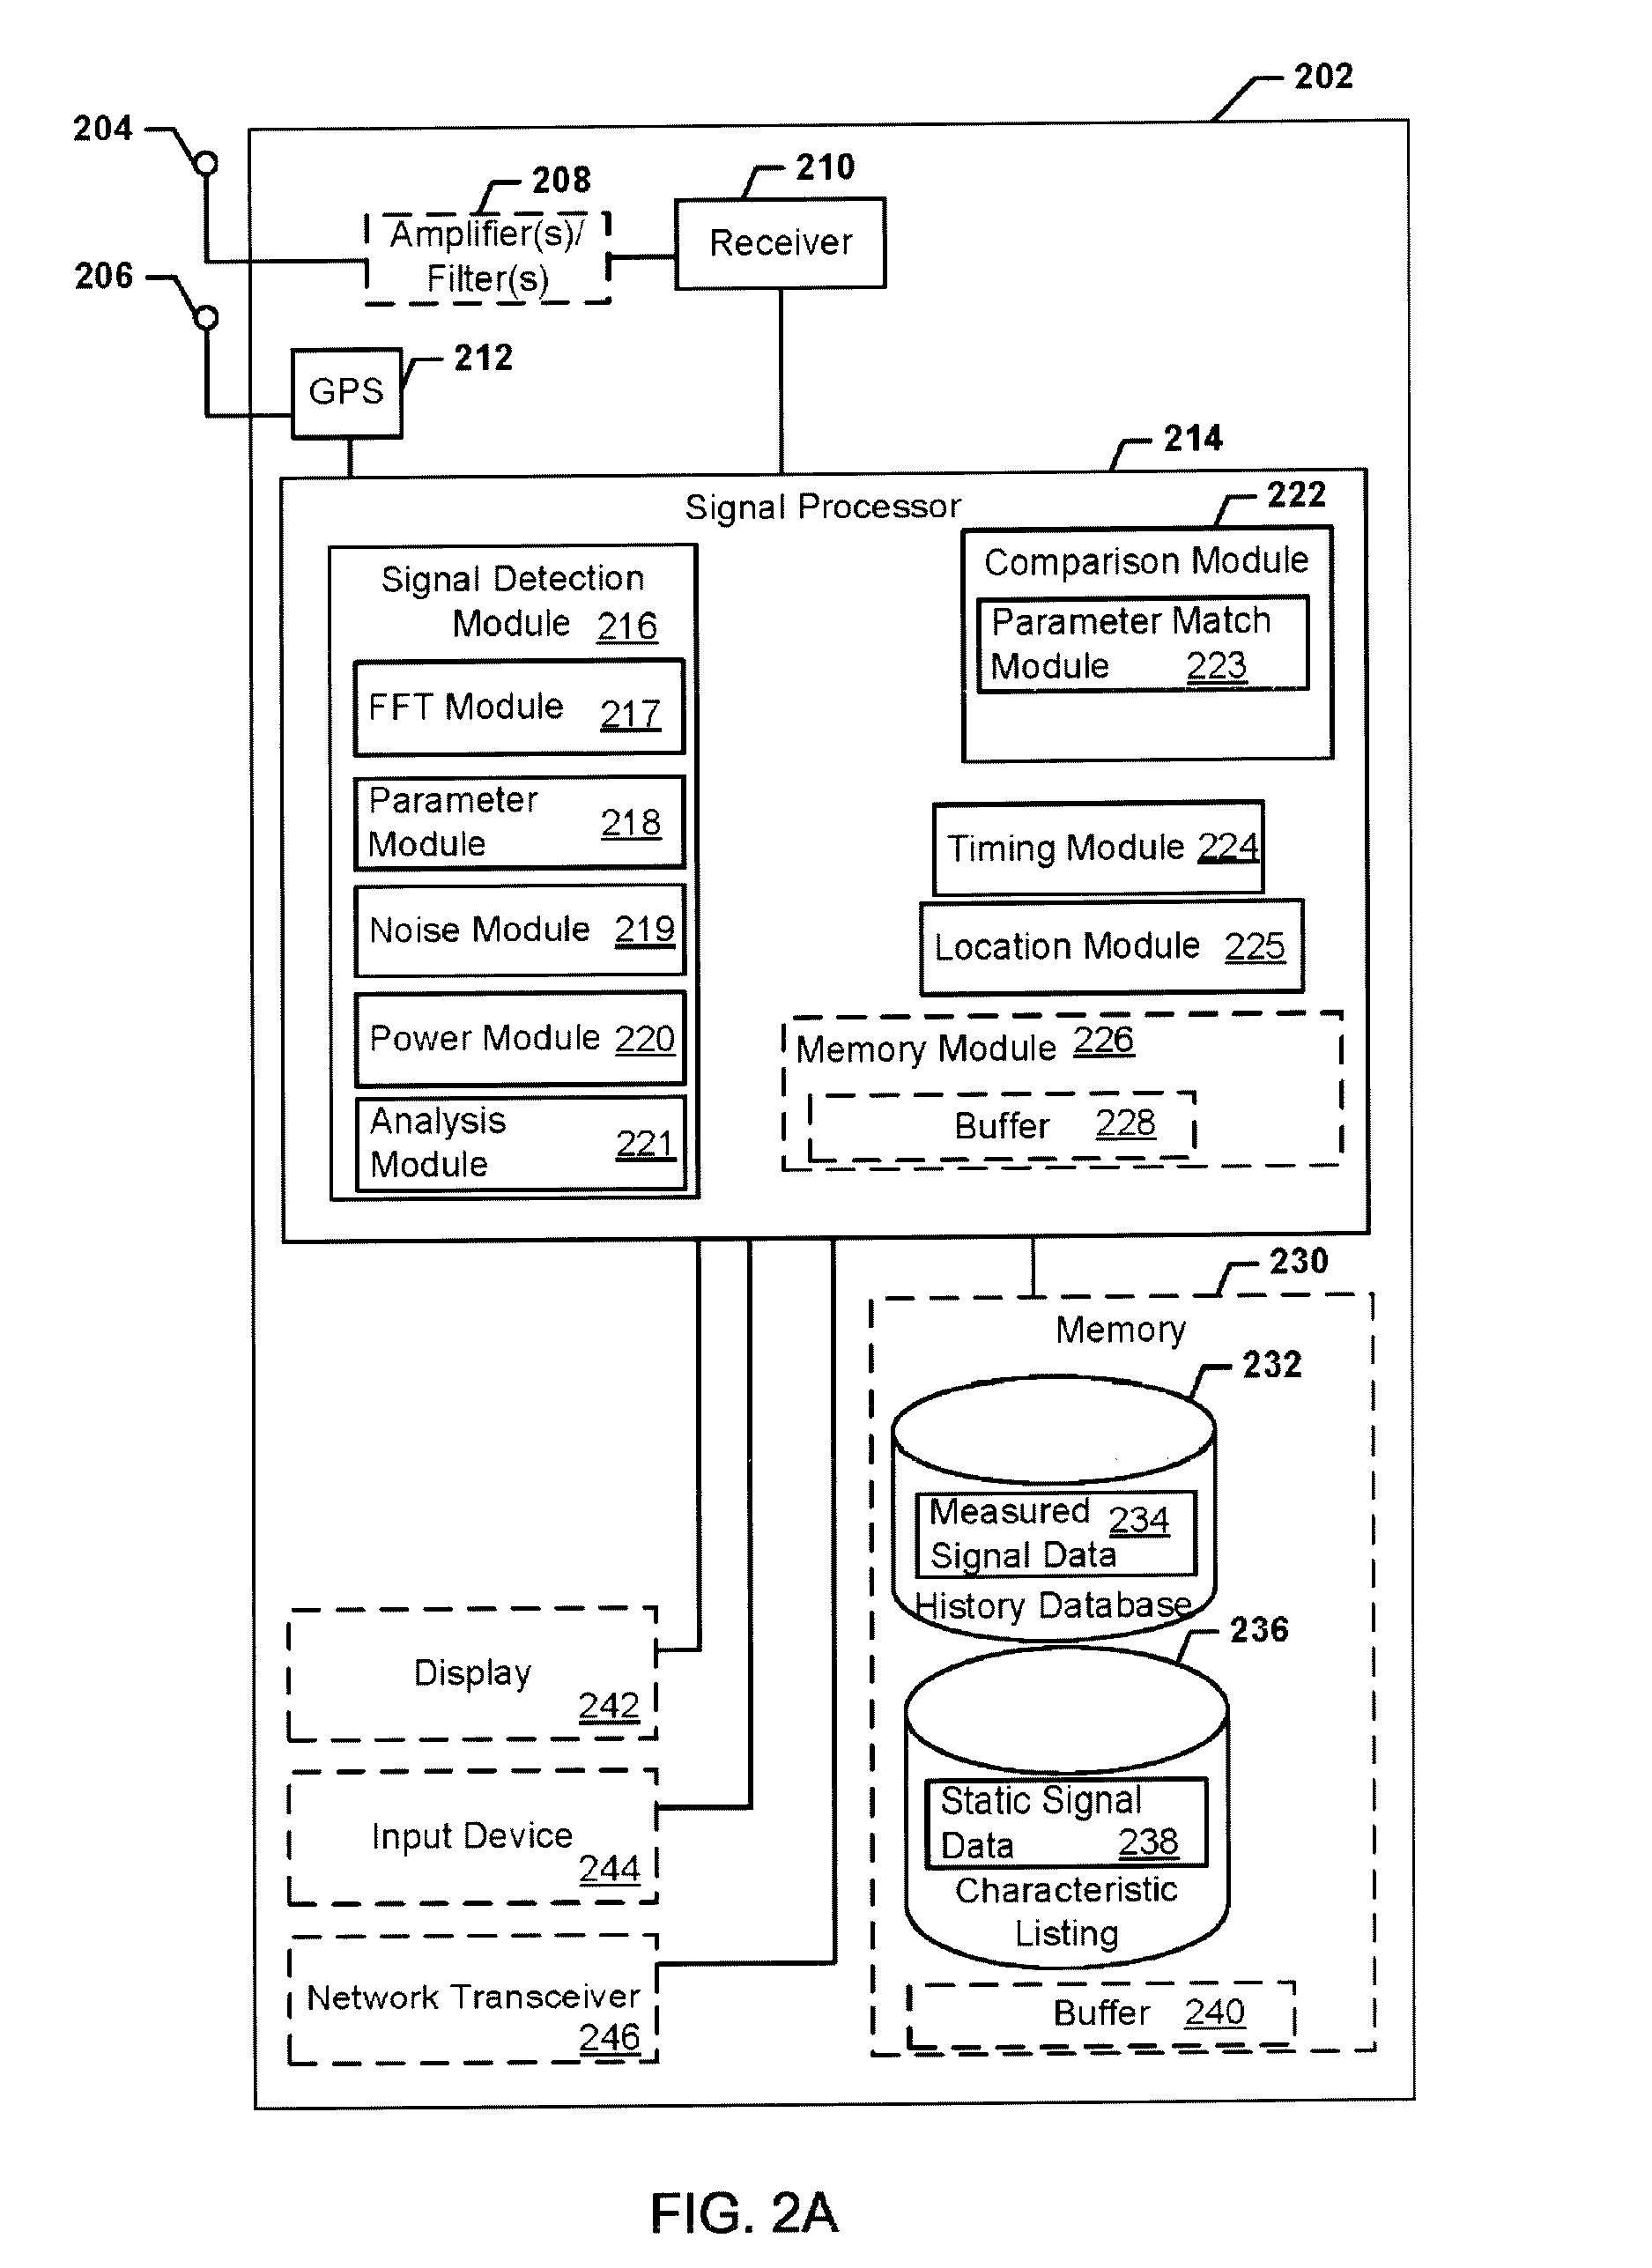 Systems, methods, and devices for electronic spectrum management with remote access to data in a virtual computing network